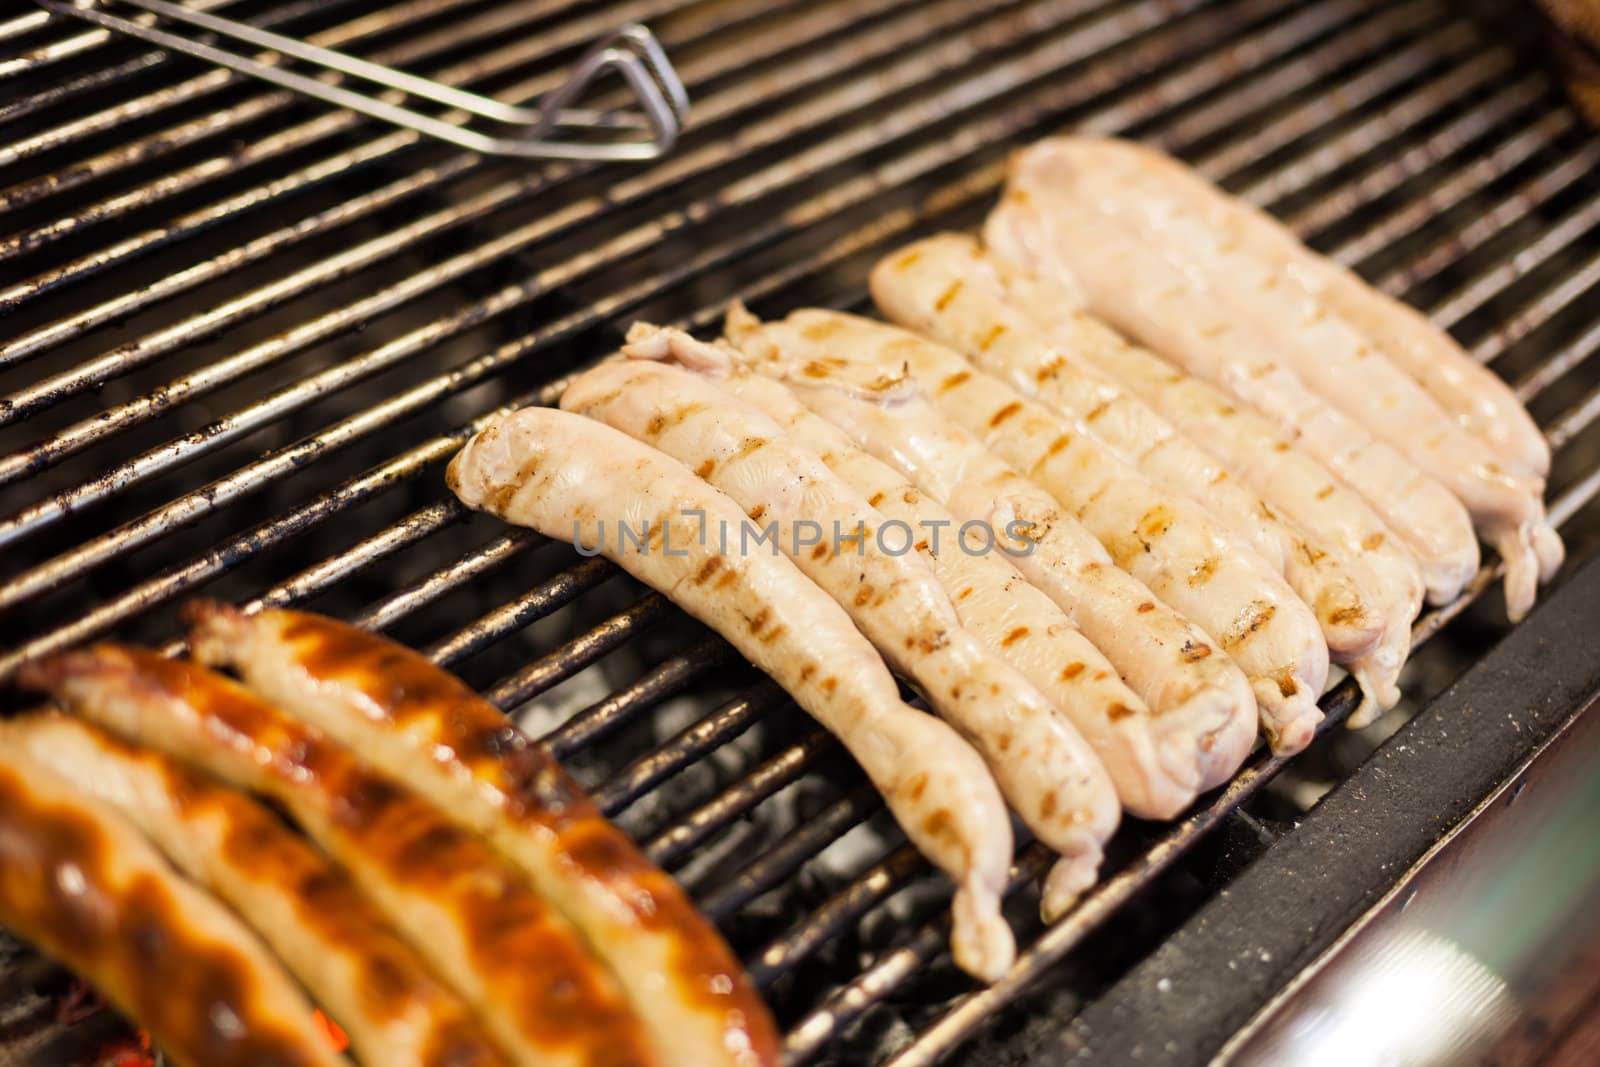 German sausages being grilled over coal outdoors